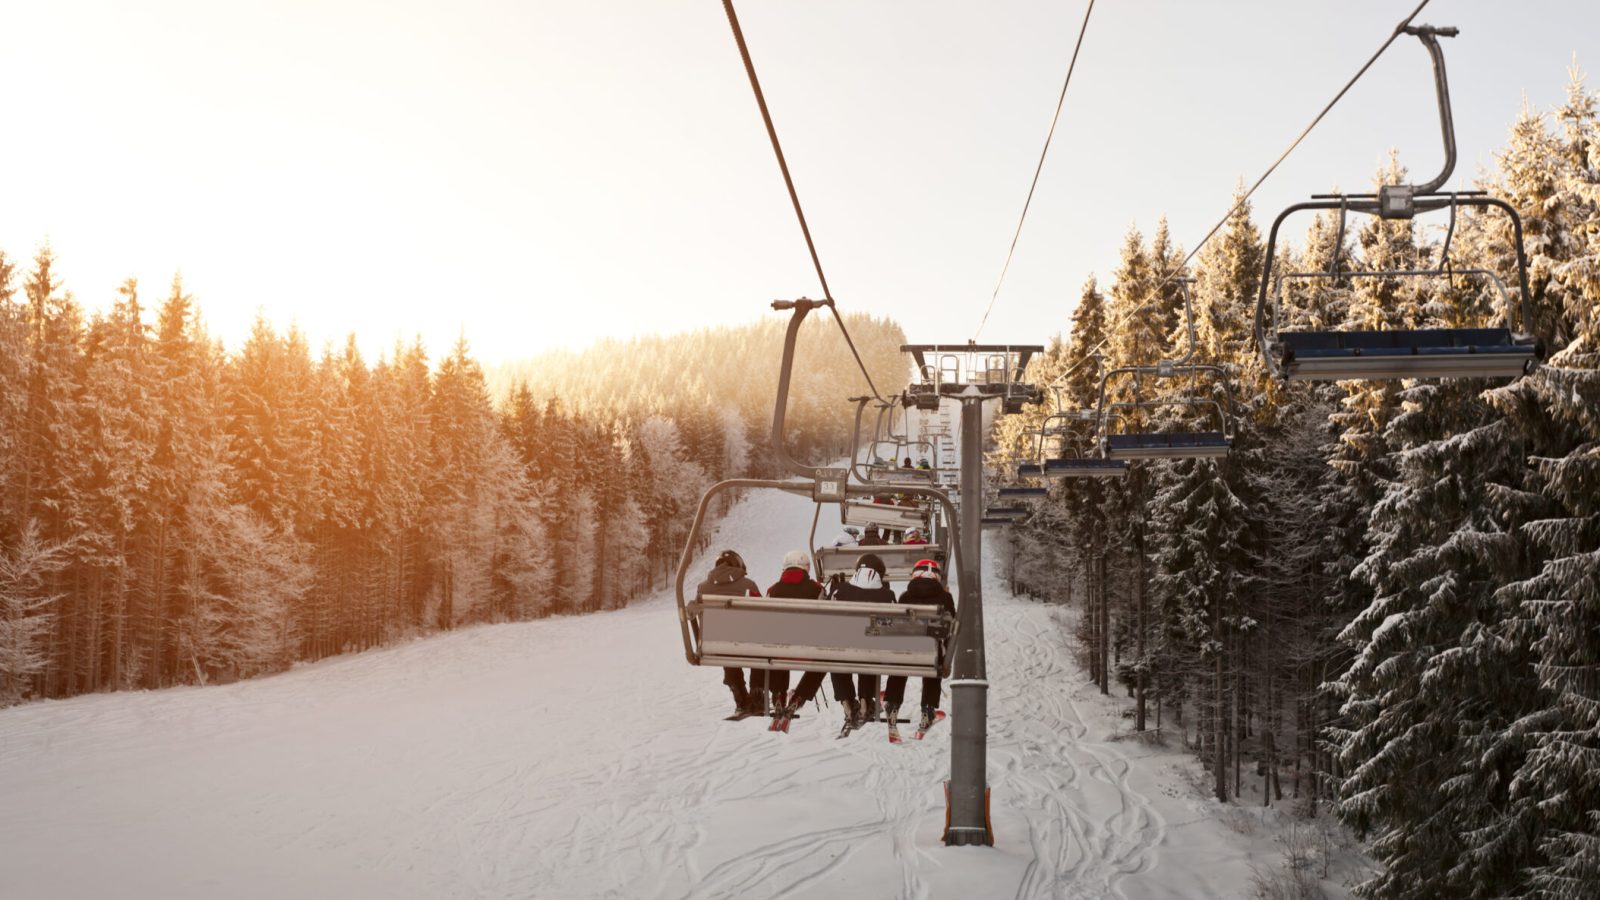 A scenic shot capturing a group of people on a ski lift, enjoying breathtaking views and winter excitement from above.